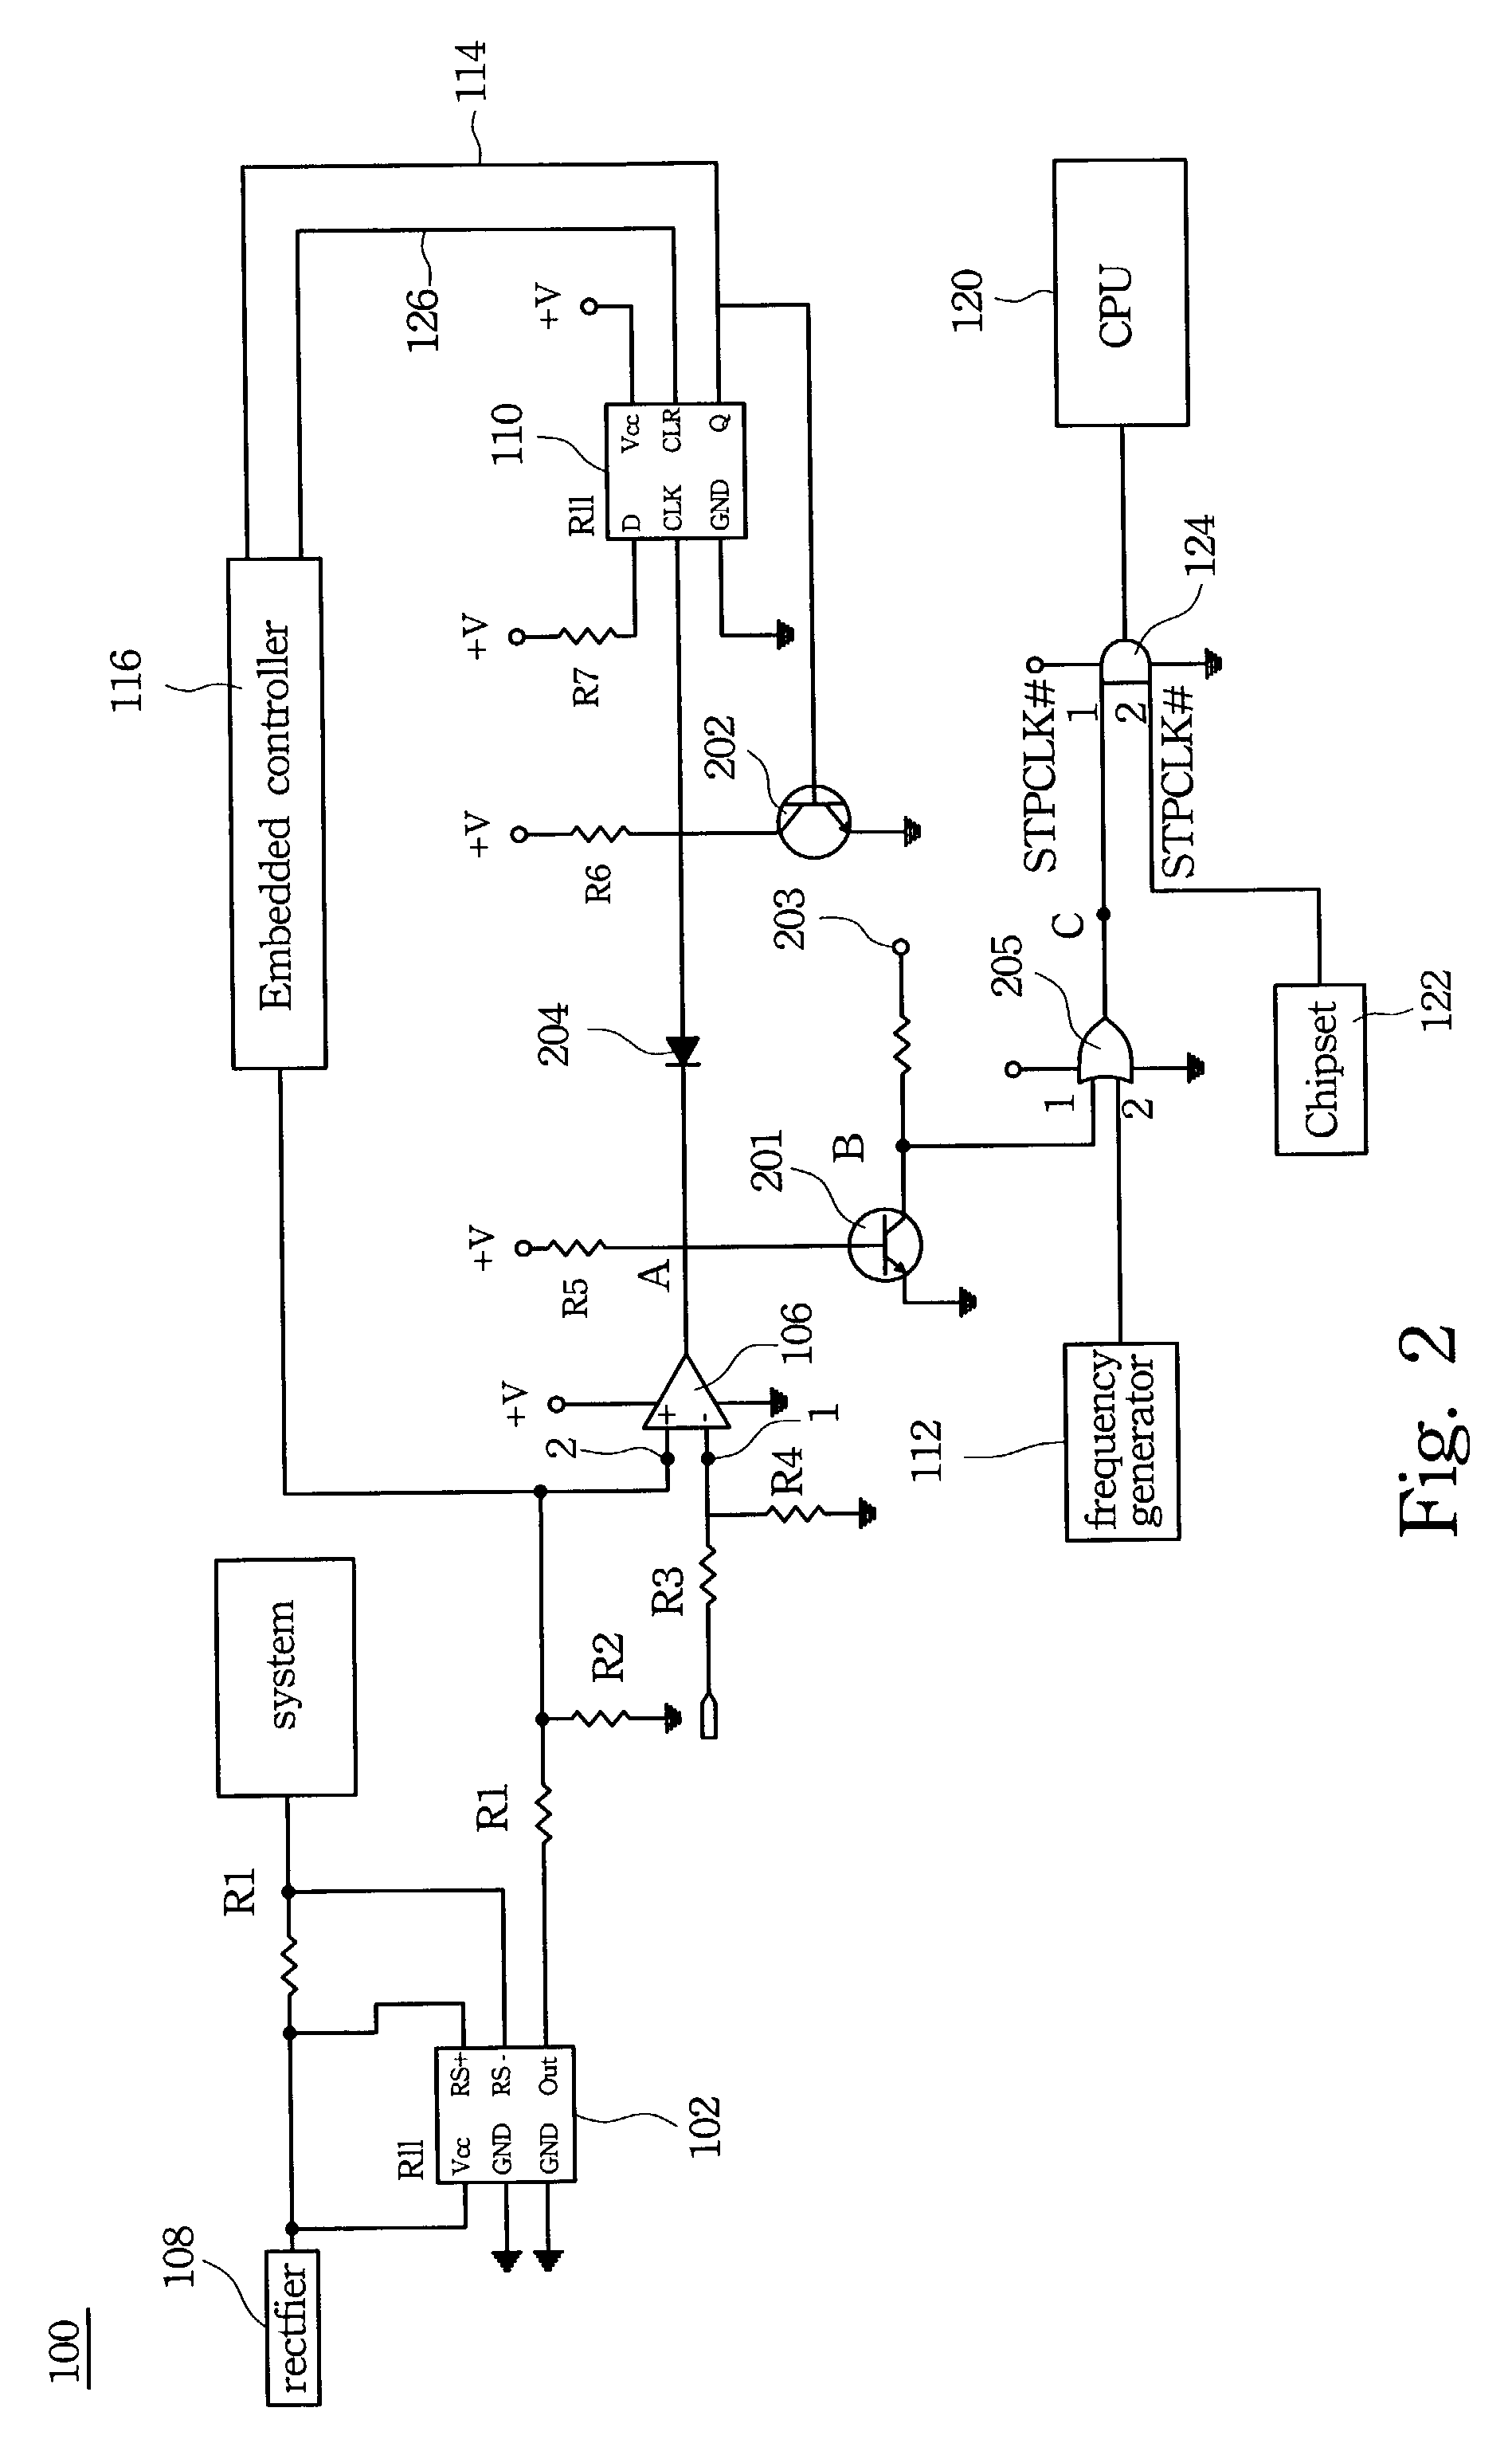 Apparatus for dynamically adjusting CPU power consumption